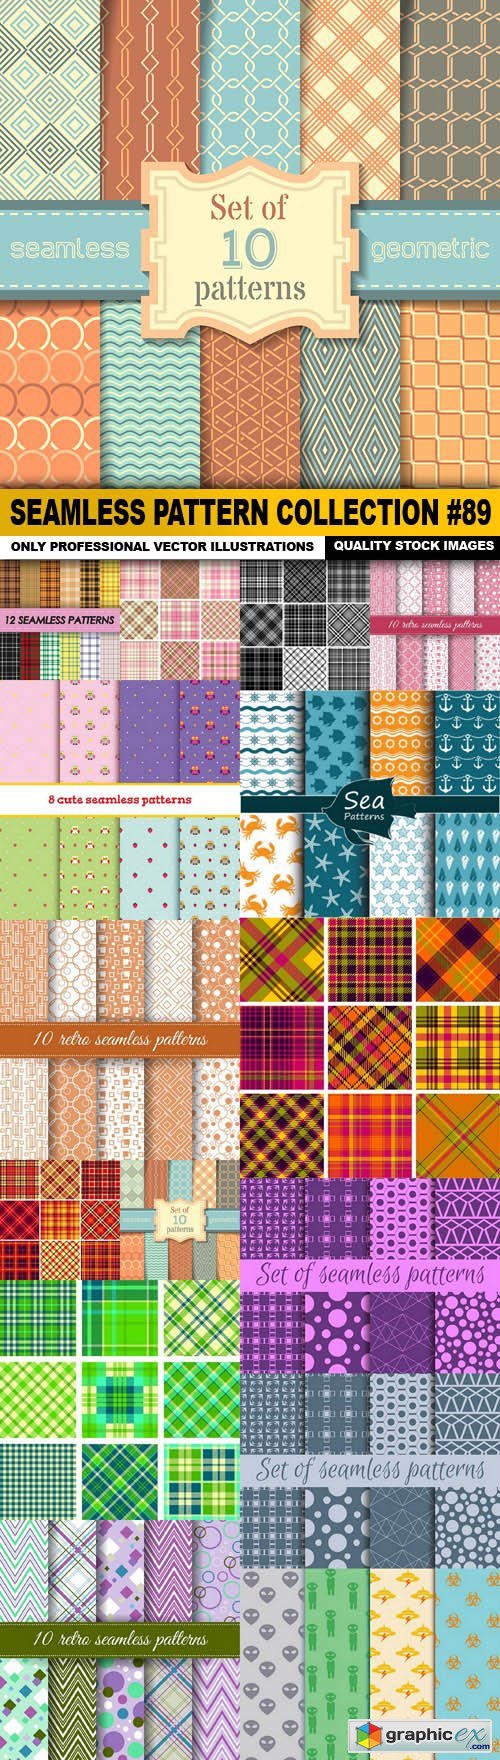 Seamless Pattern Collection #89 - 15 Vector